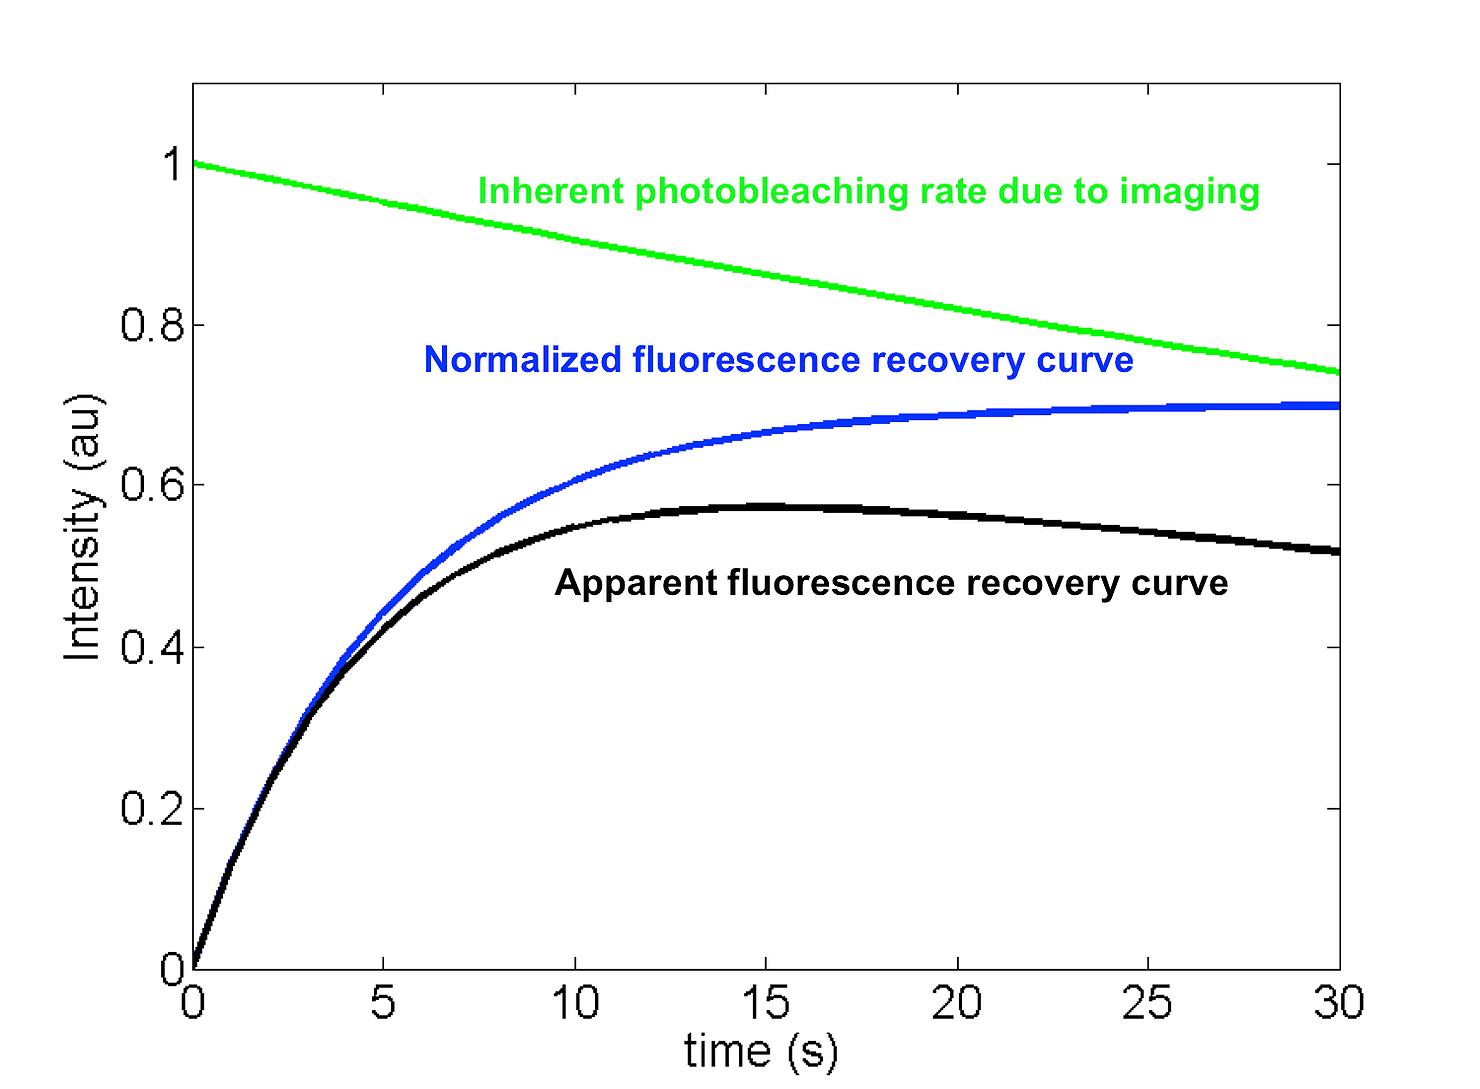 Figure 3. Inherent imaging-related photobleaching of the fluorophore will affect the recovery rate. Most fluorophores will bleach during the course of imaging as traced by the green line. This inherent photobleaching event will skew the fluorescence recovery rate if not corrected. To obtain the inherent bleaching rate, image a neighboring cell in the same field of view if possible. Another way is to capture a few timelapse images before introducing the strong photobleaching pulse to begin the FRAP experiment. The time-dependent fluorescent intensity can then be extracted from the fluorescent intensity plot.